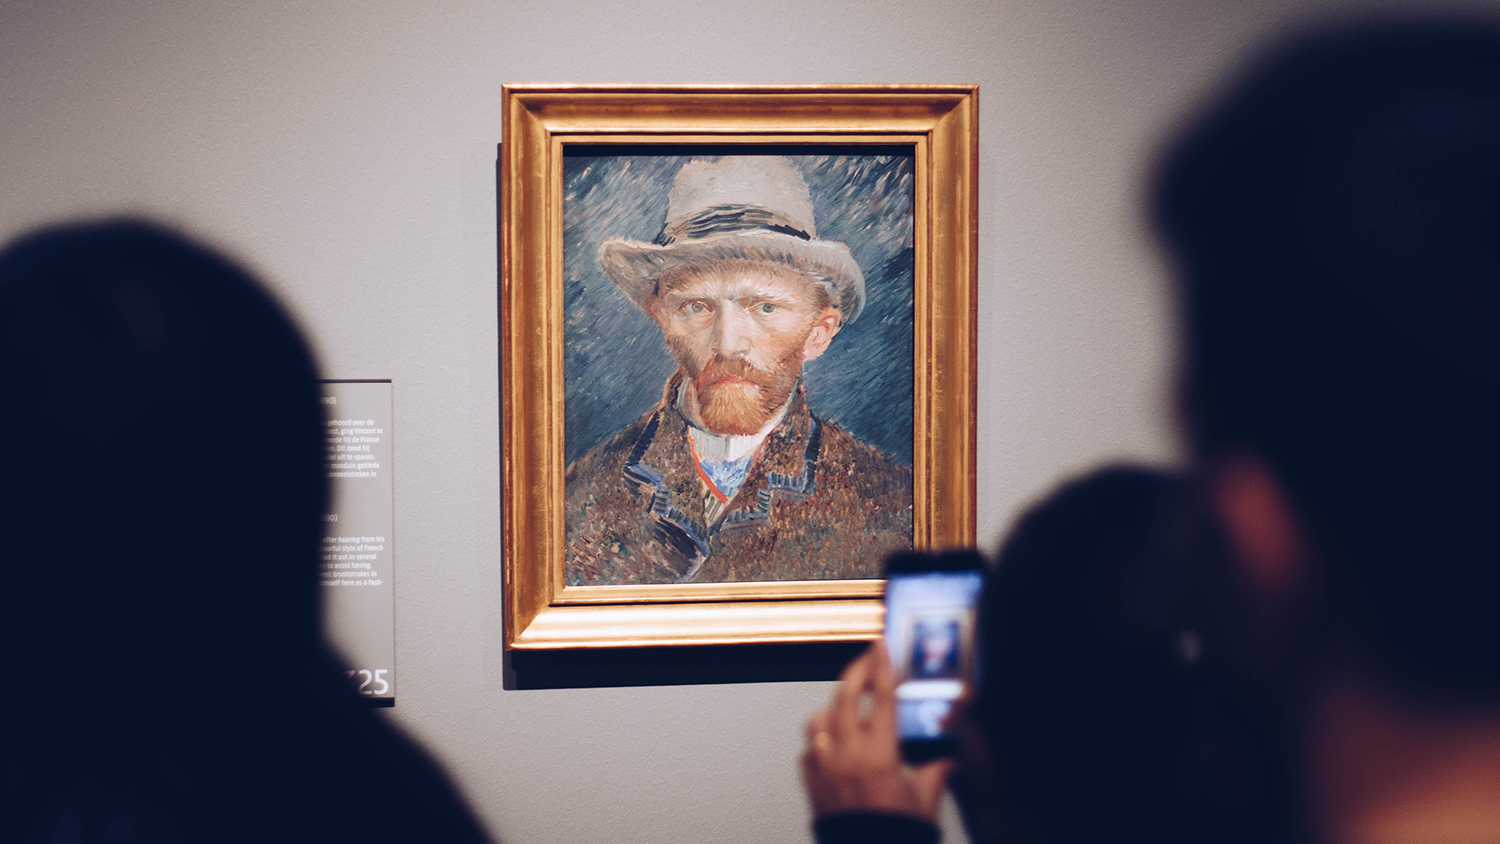 Vincent Van Gogh: A stranger on this earth